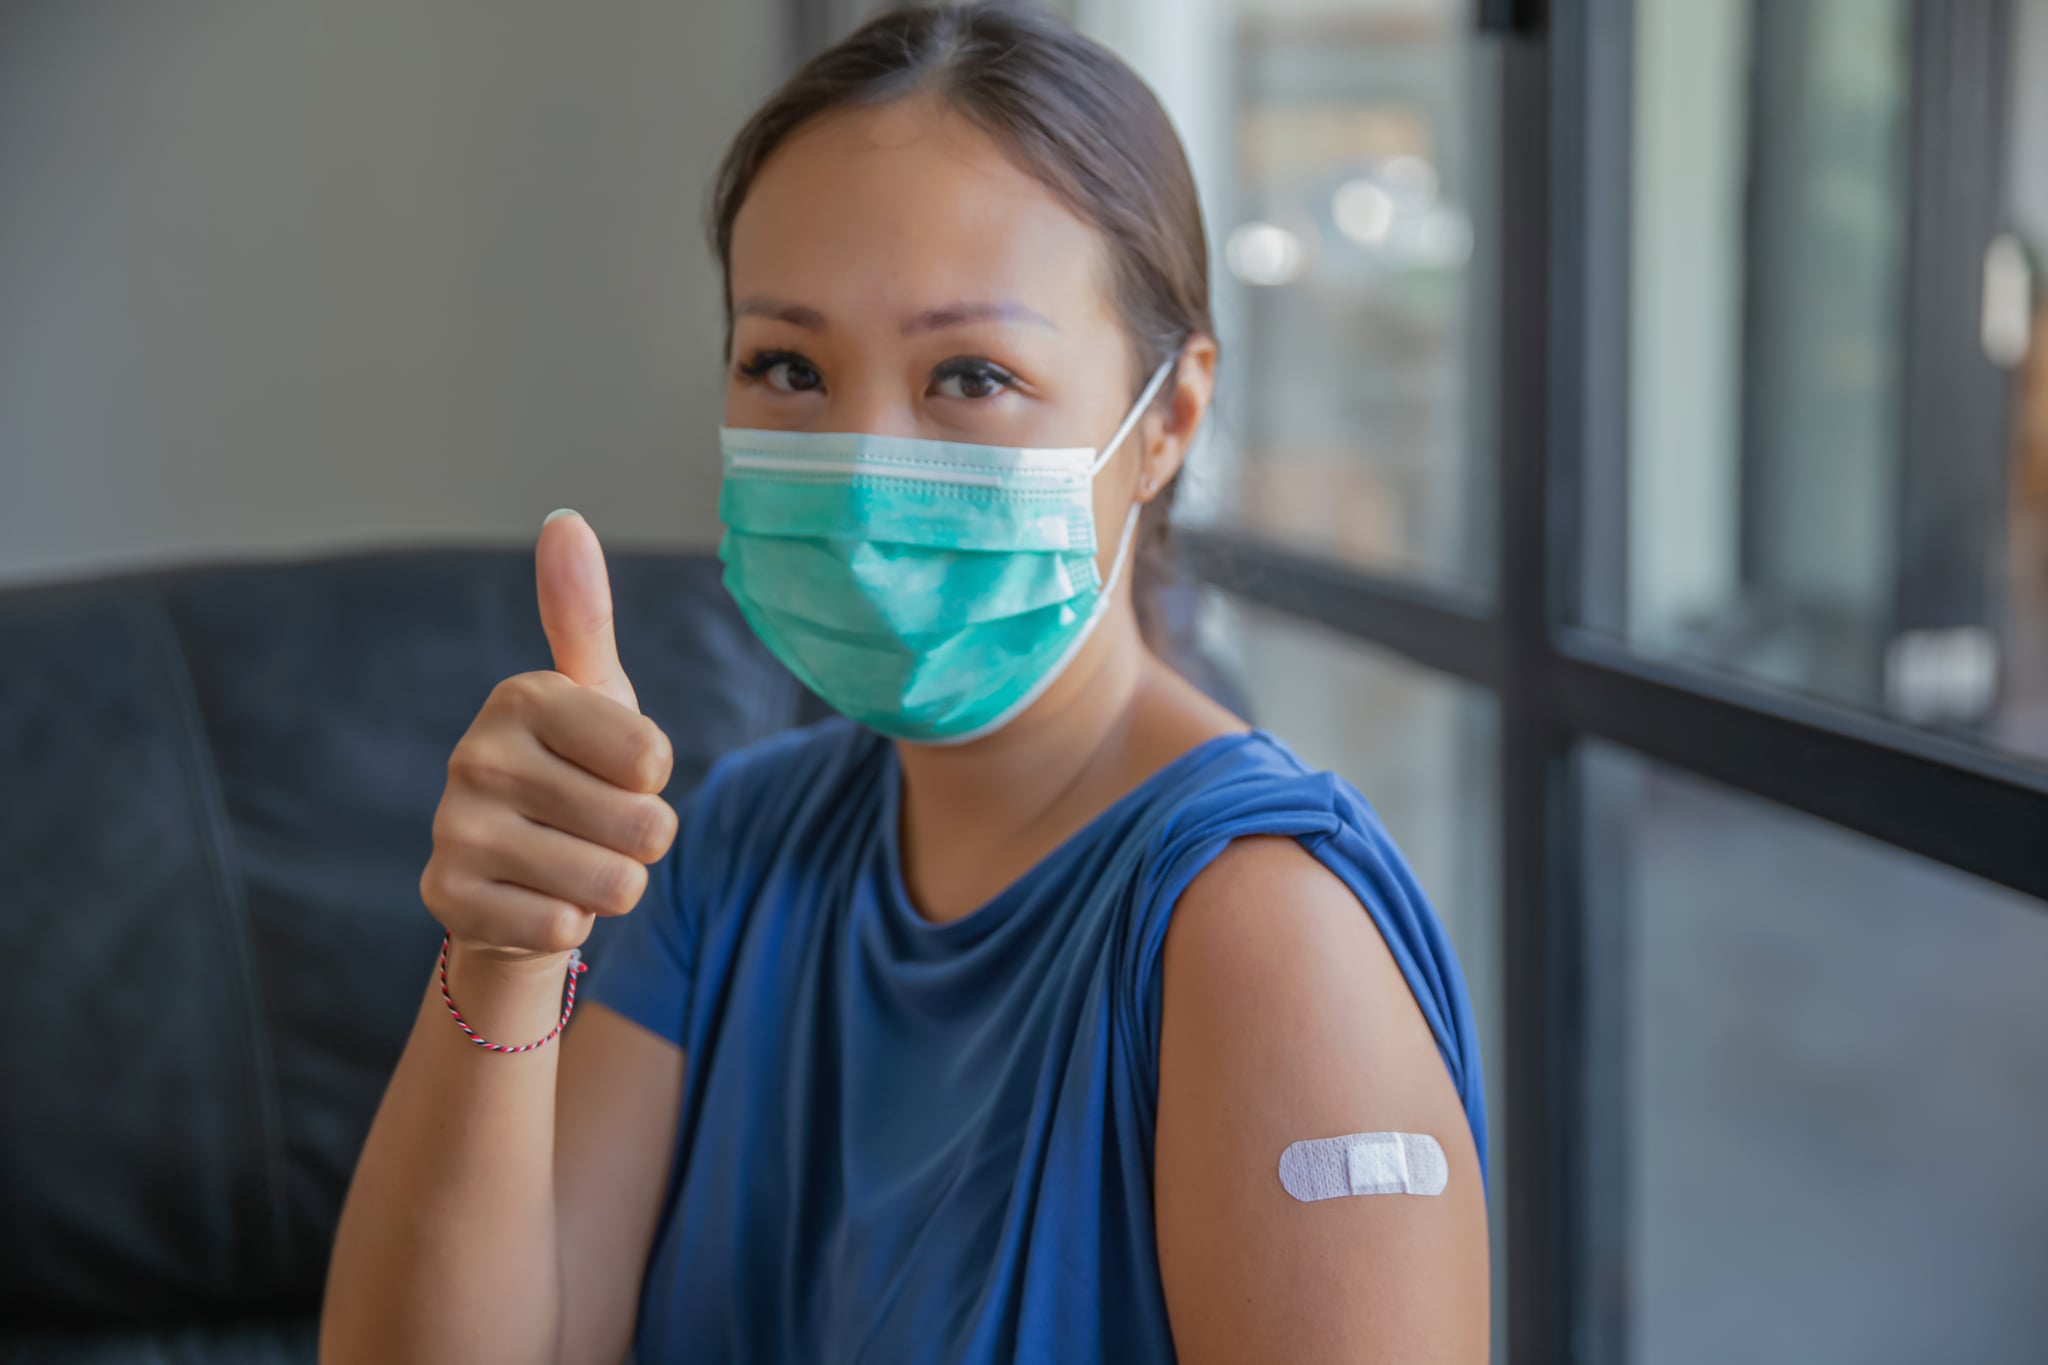 Close-up shot of proud Asian woman with protective face mask giving a thumbs up after receiving a COVID-19 vaccine at medical clinic. She's smiling behind her mask after a success vaccination.